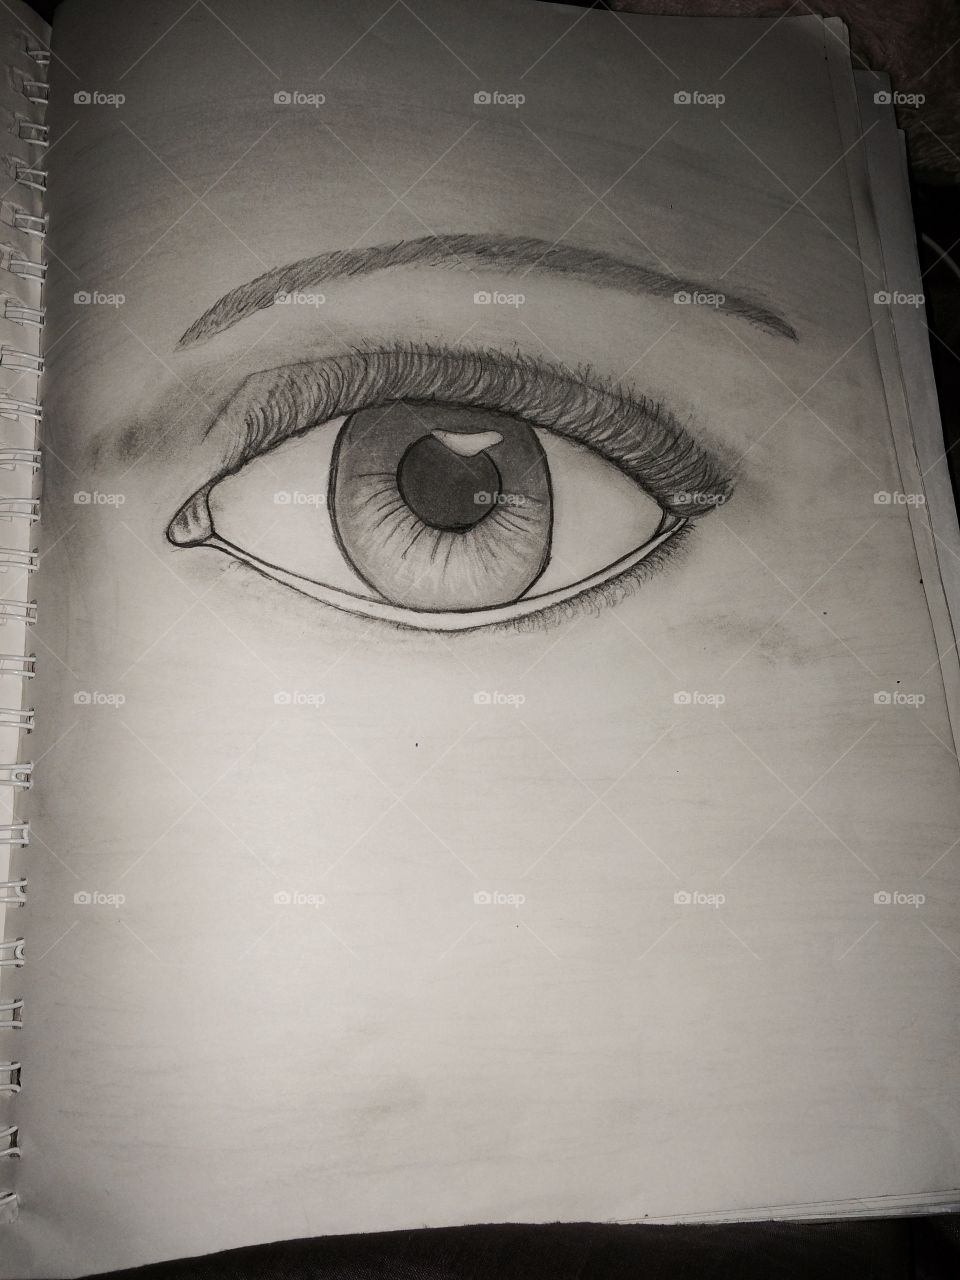 An eye. Not much more to be said. I did it free hand, took me about a week to finish